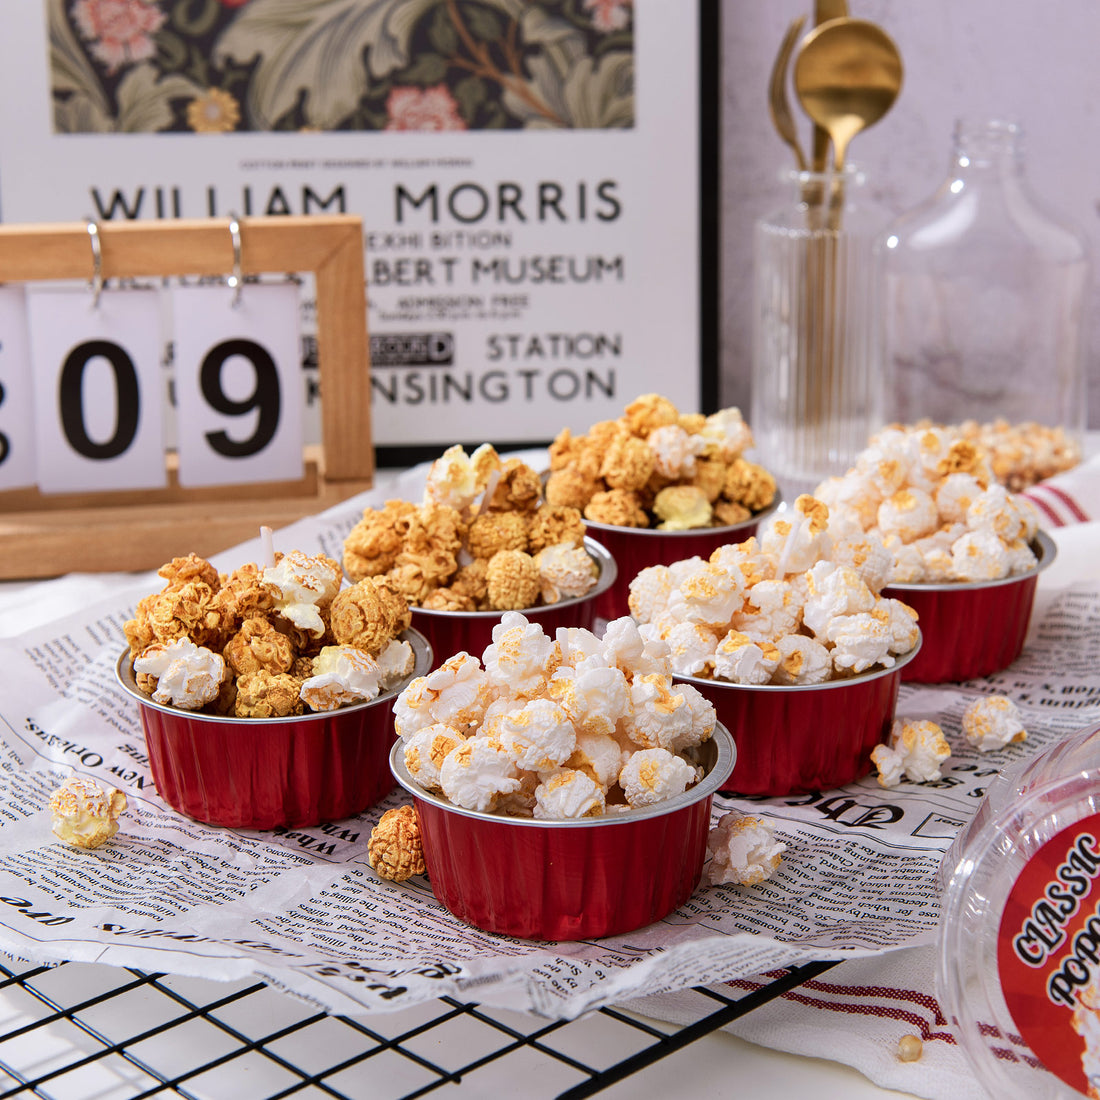 Bring a Popcorn Candle that might enlighten you.